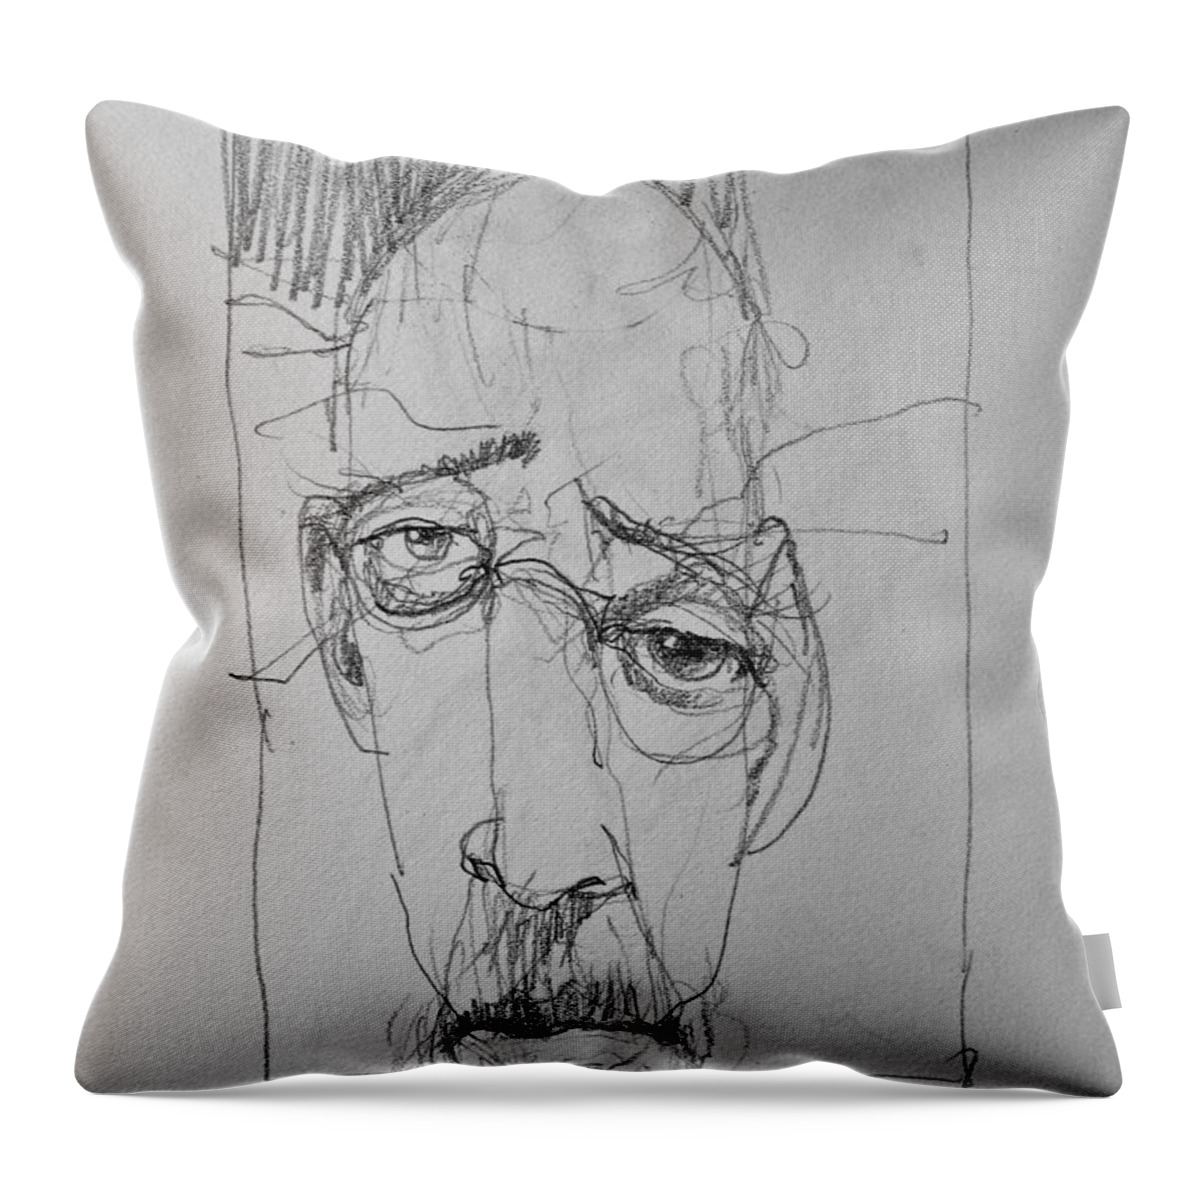 Drawing Throw Pillow featuring the drawing Almost Finished - Literally And Figuratively by Cliff Spohn